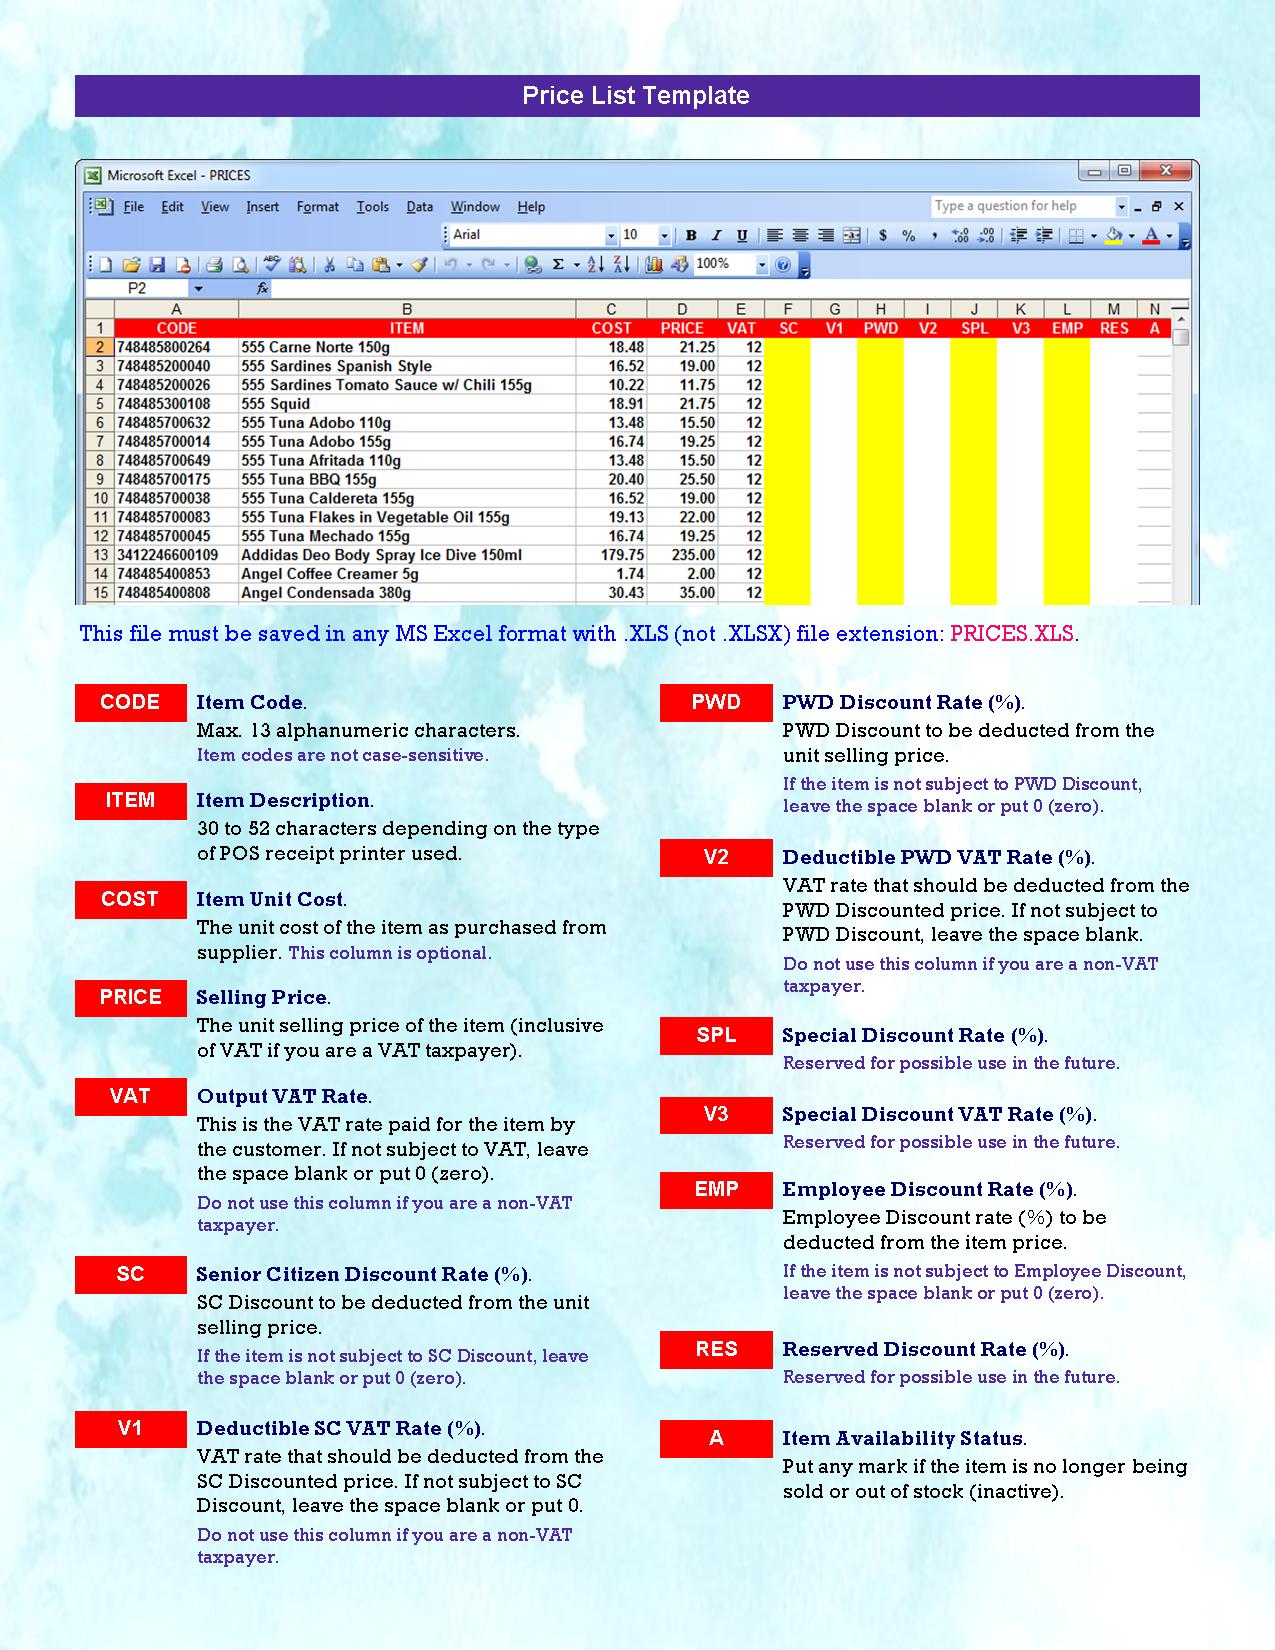 MS Excel Price List Template